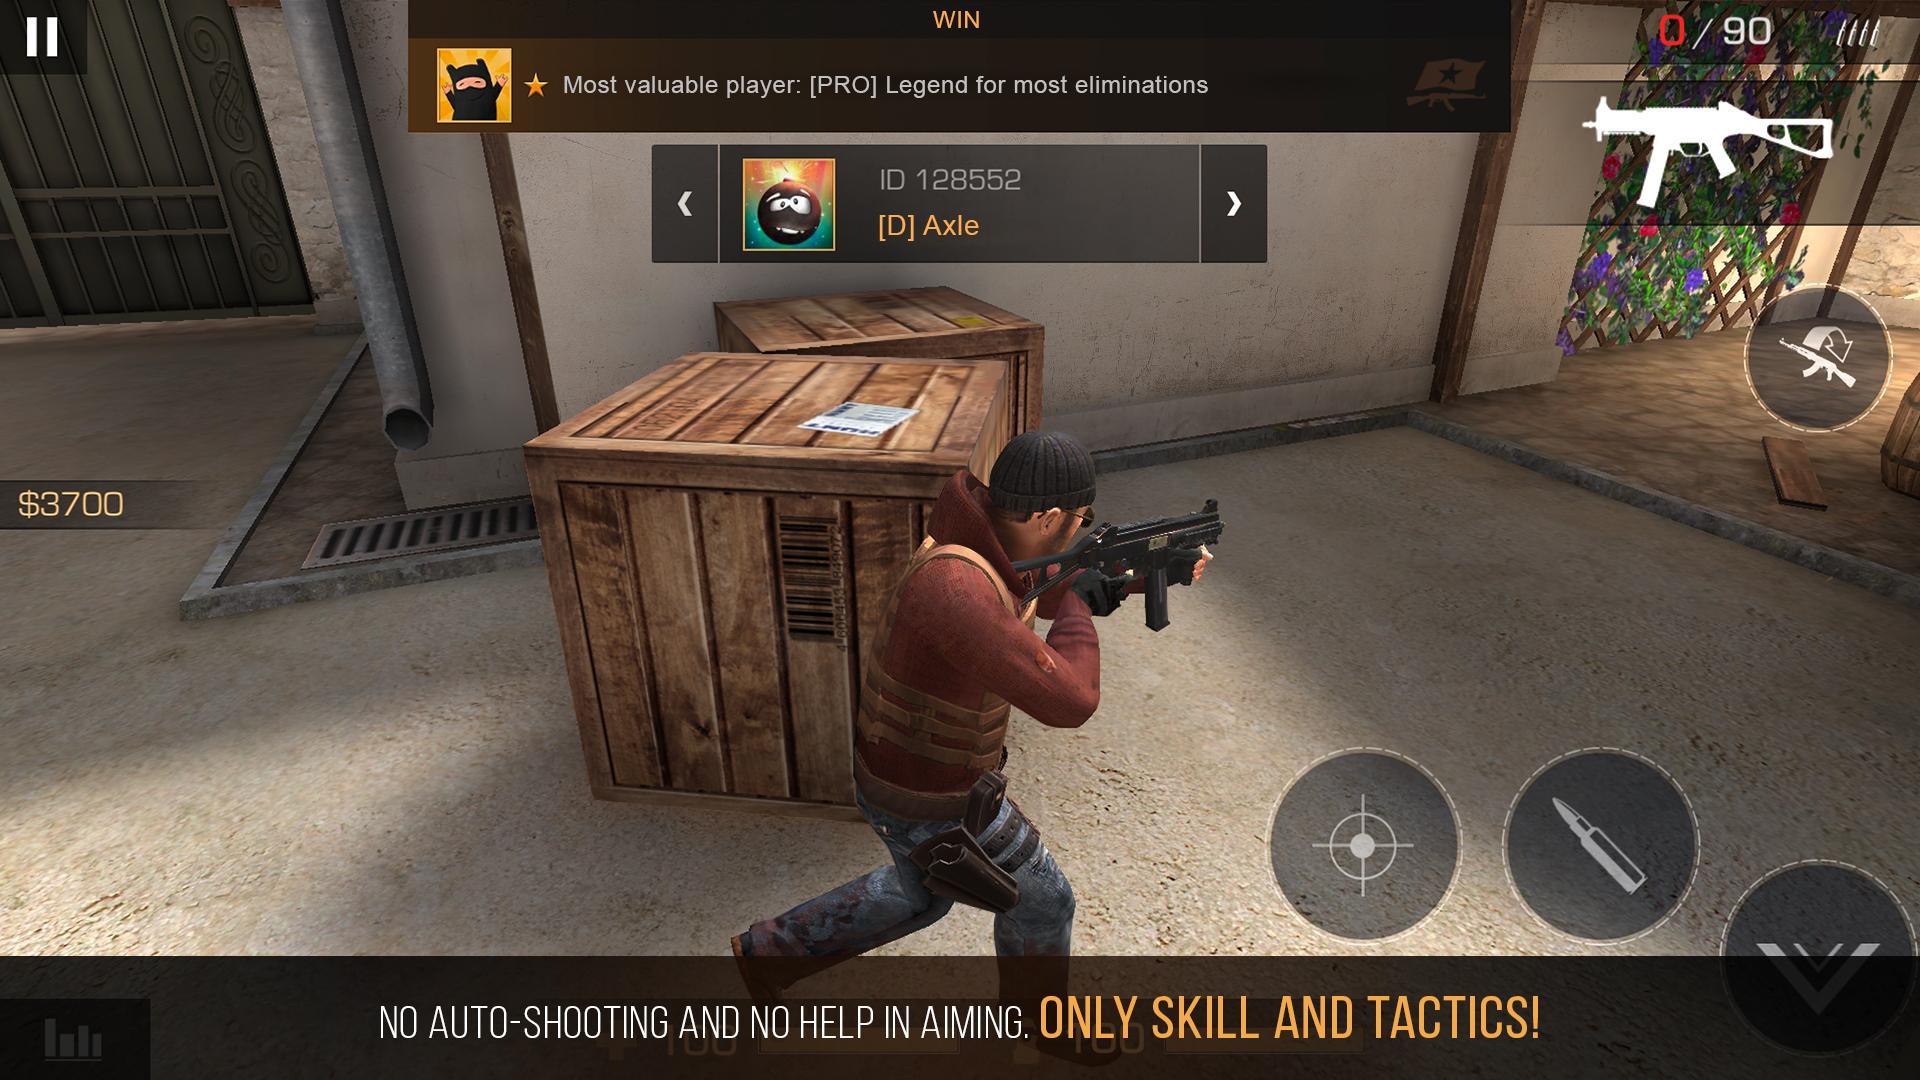 Standoff 2 for Android - APK Download - 